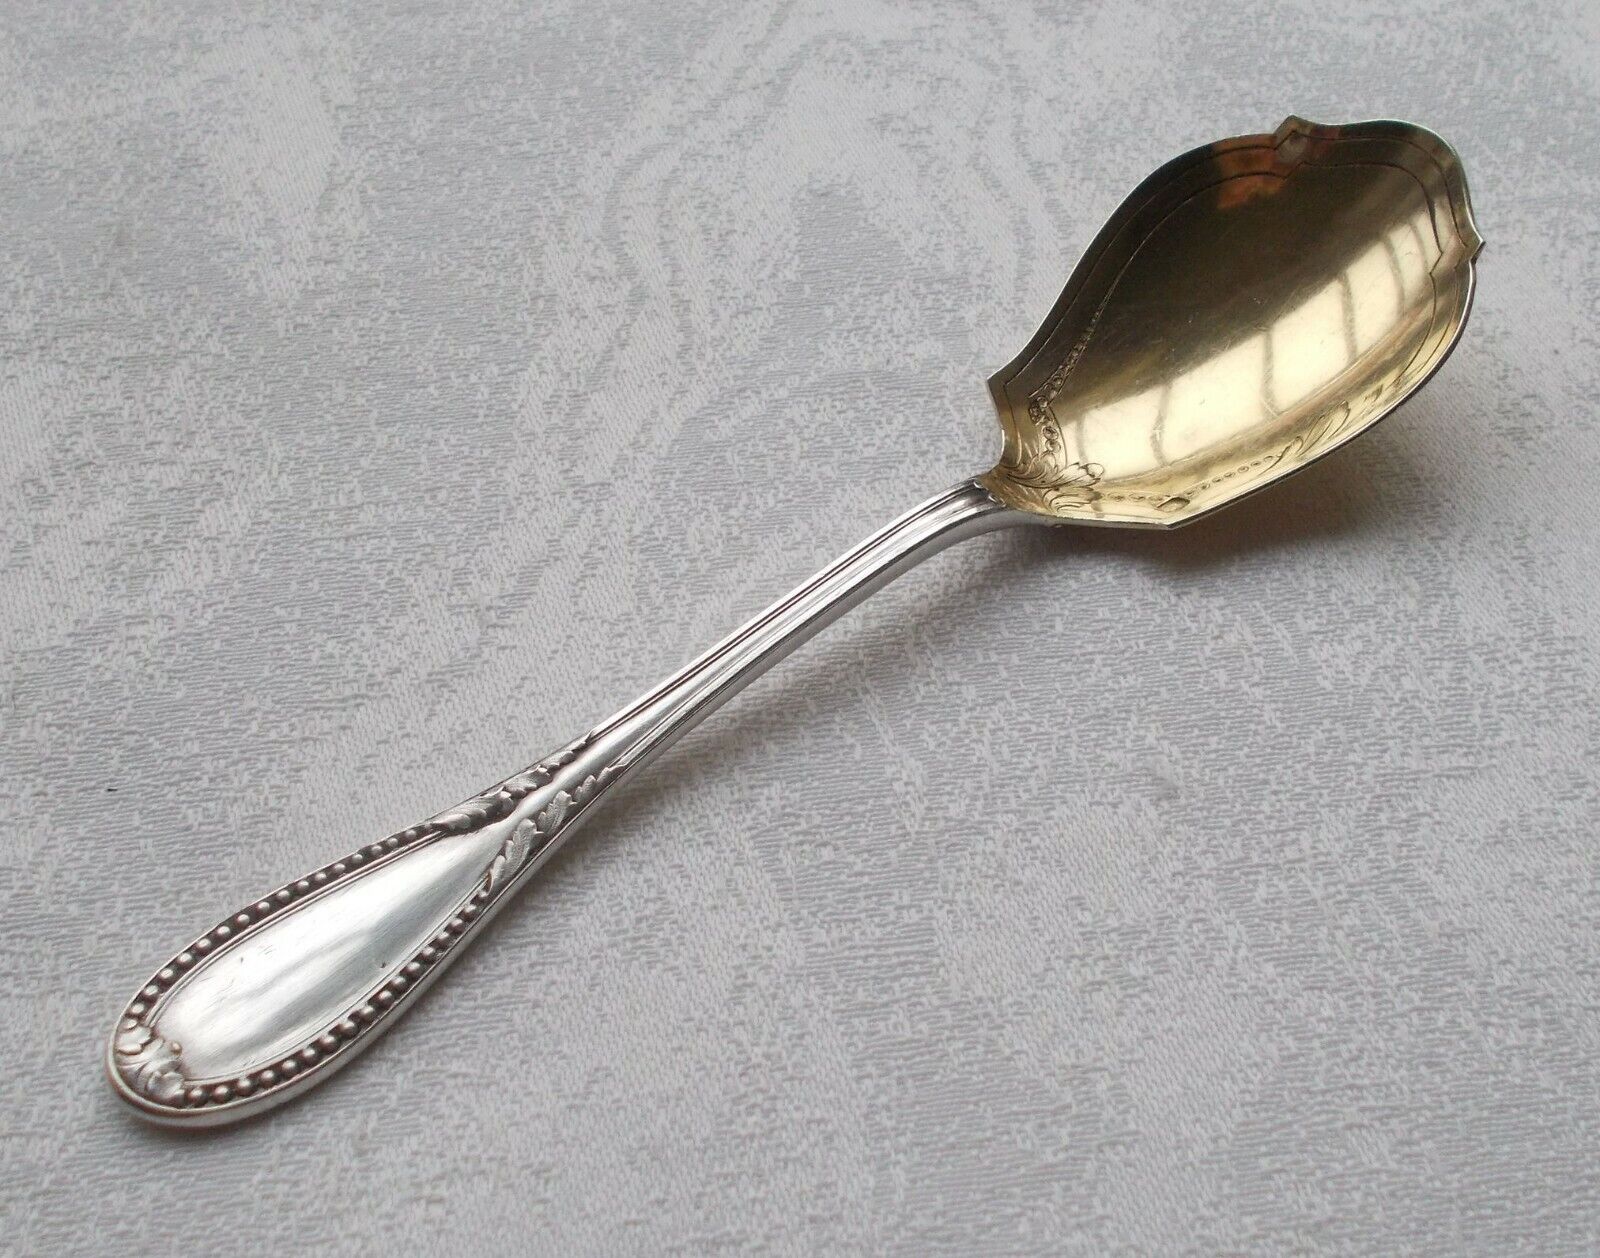 Rare Elegant Serving Spoon In Art Nouveau Style 950er Sterling Silver From